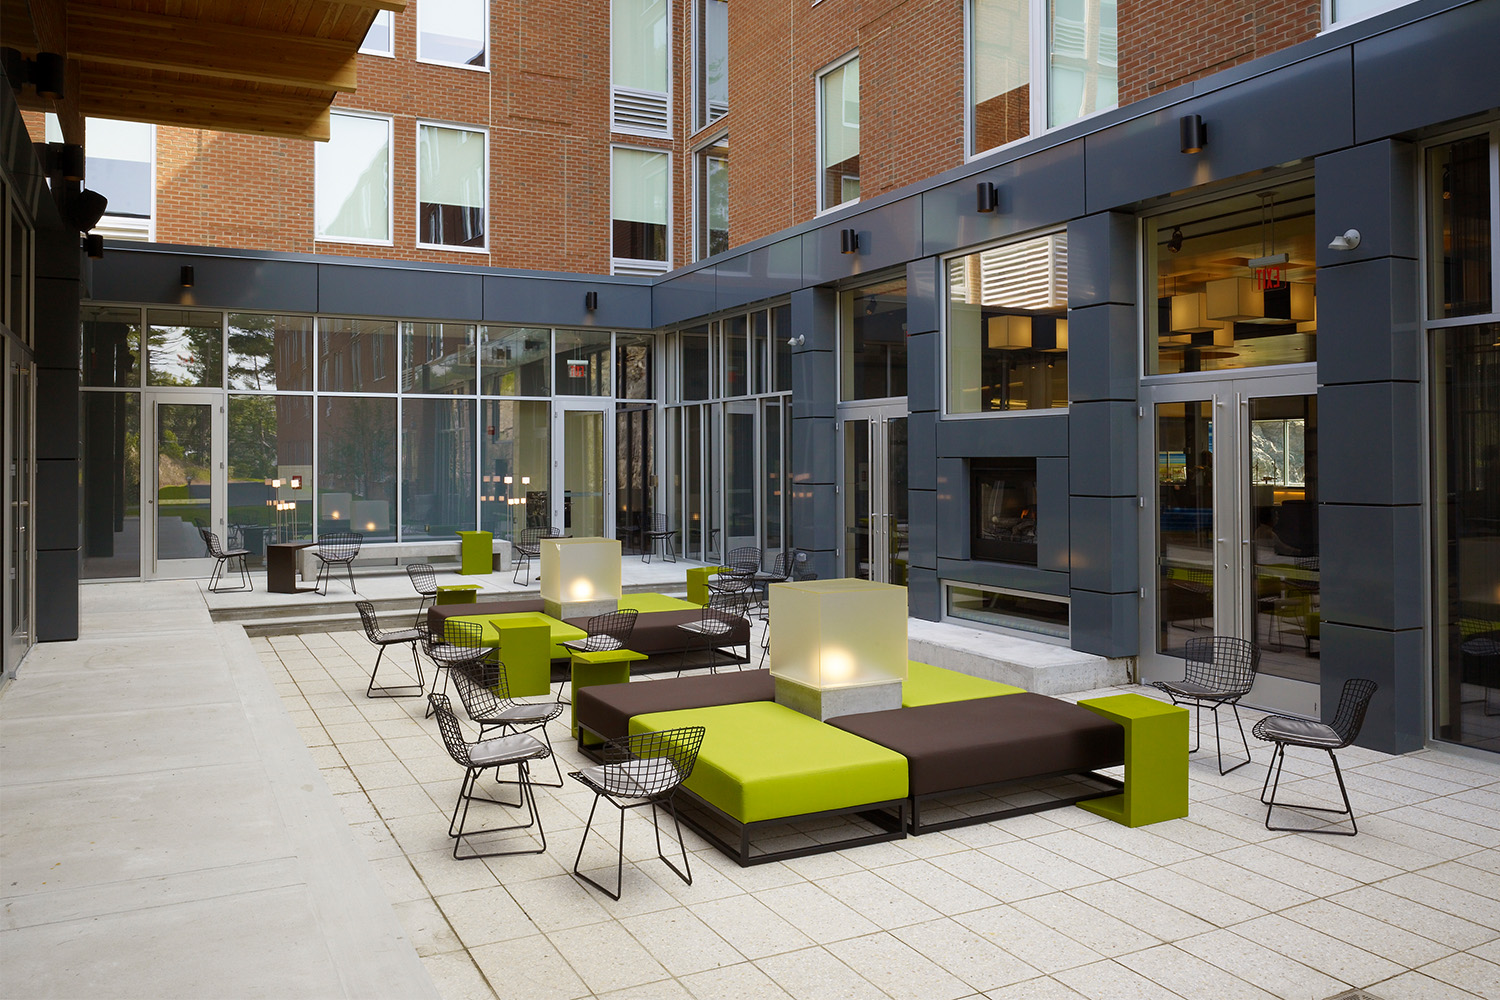 Outdoor patio area with black metal chairs, and green and brown cushions 